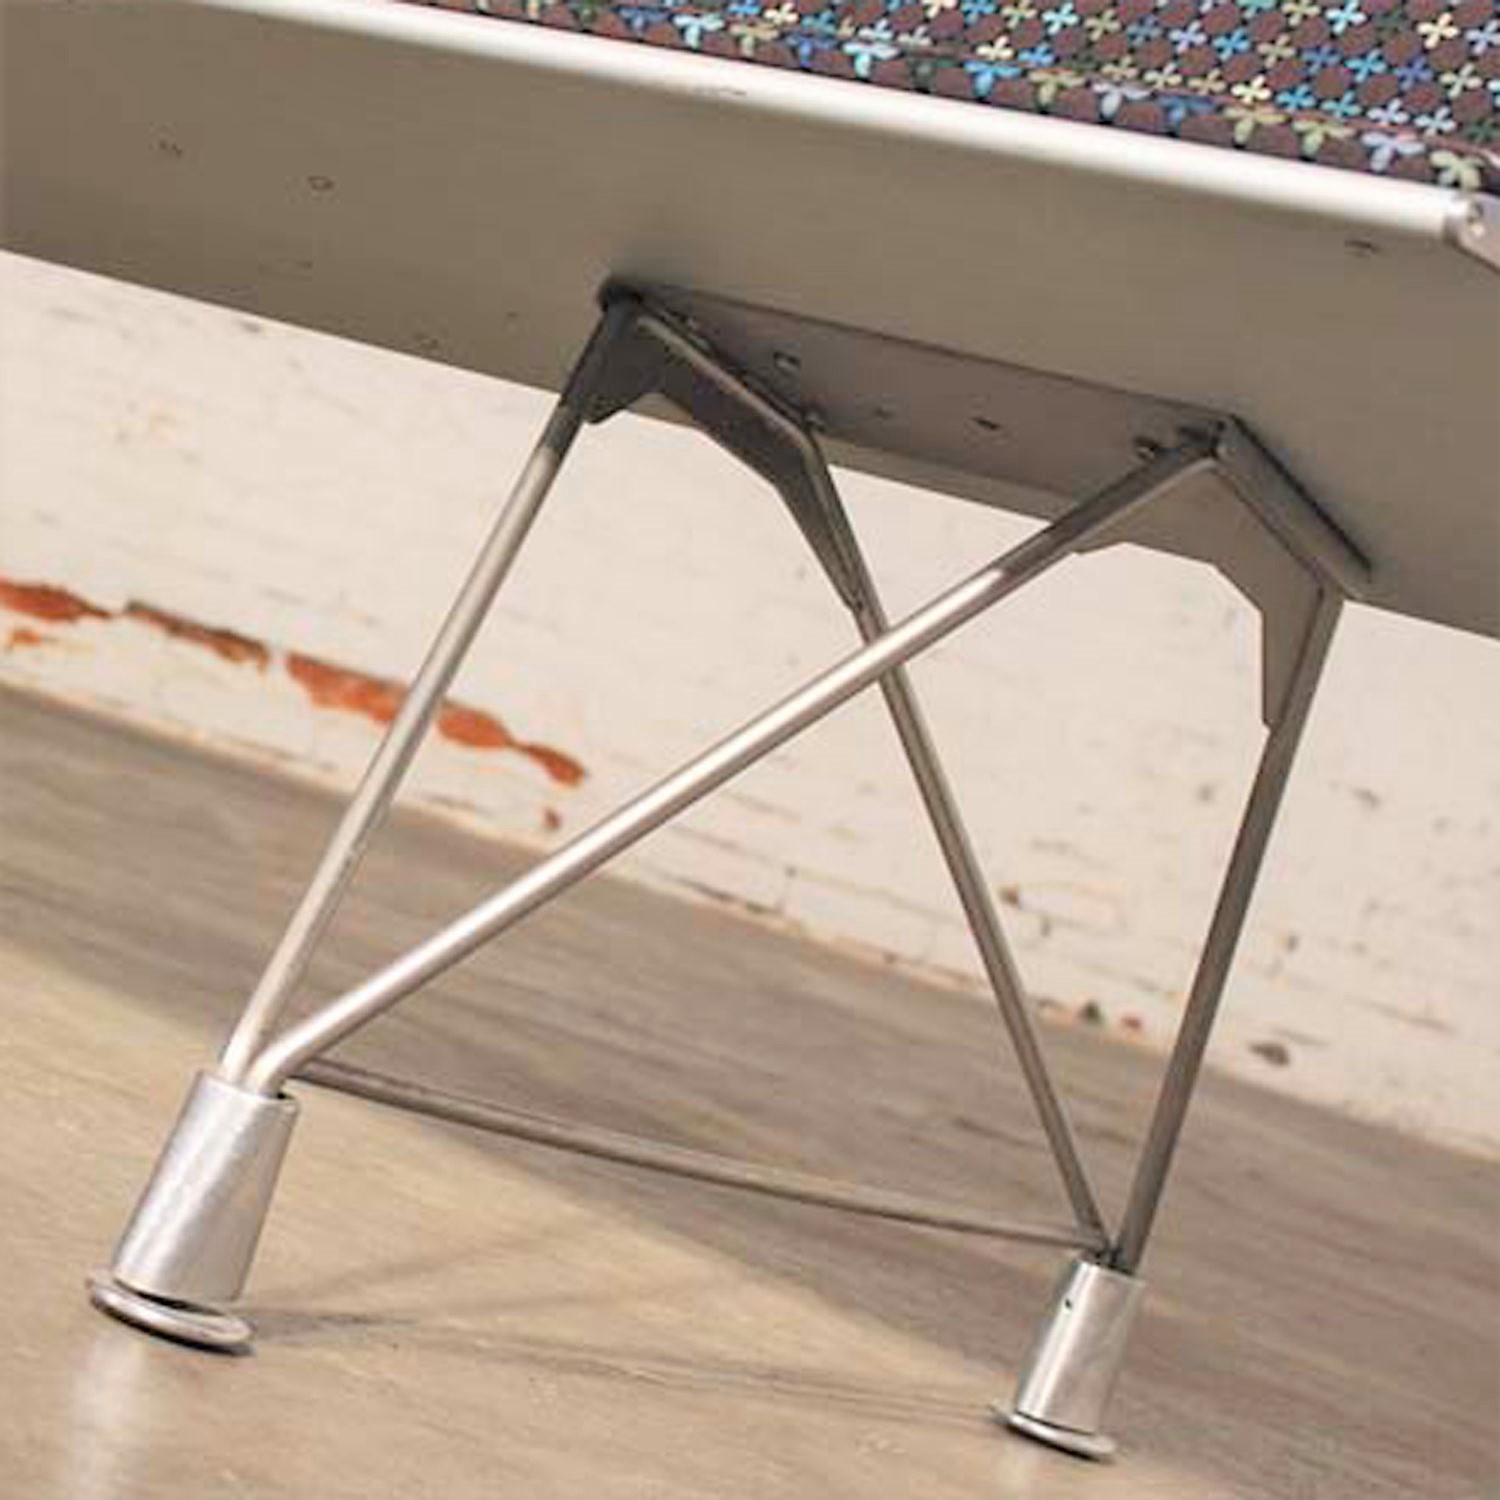 Aero Aluminum Bench from Davis Furniture by Lievore Altherr Molina